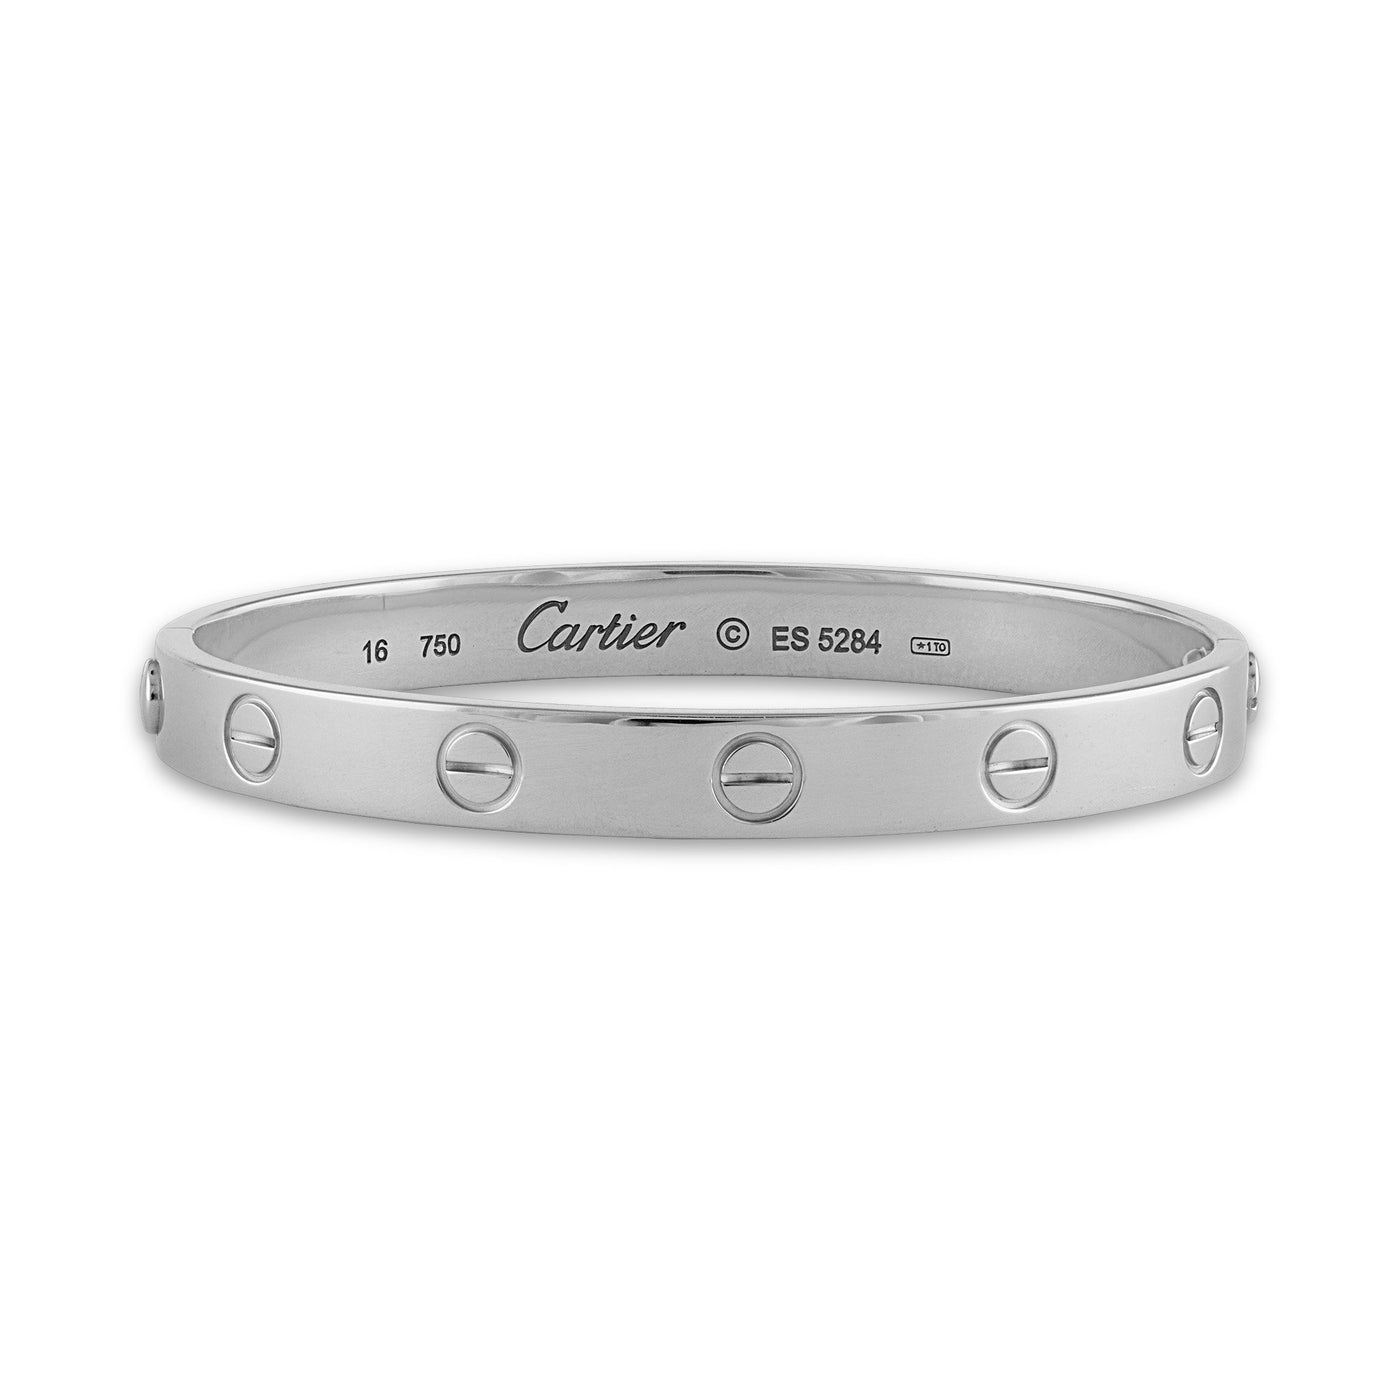 Cartier watch serial number check